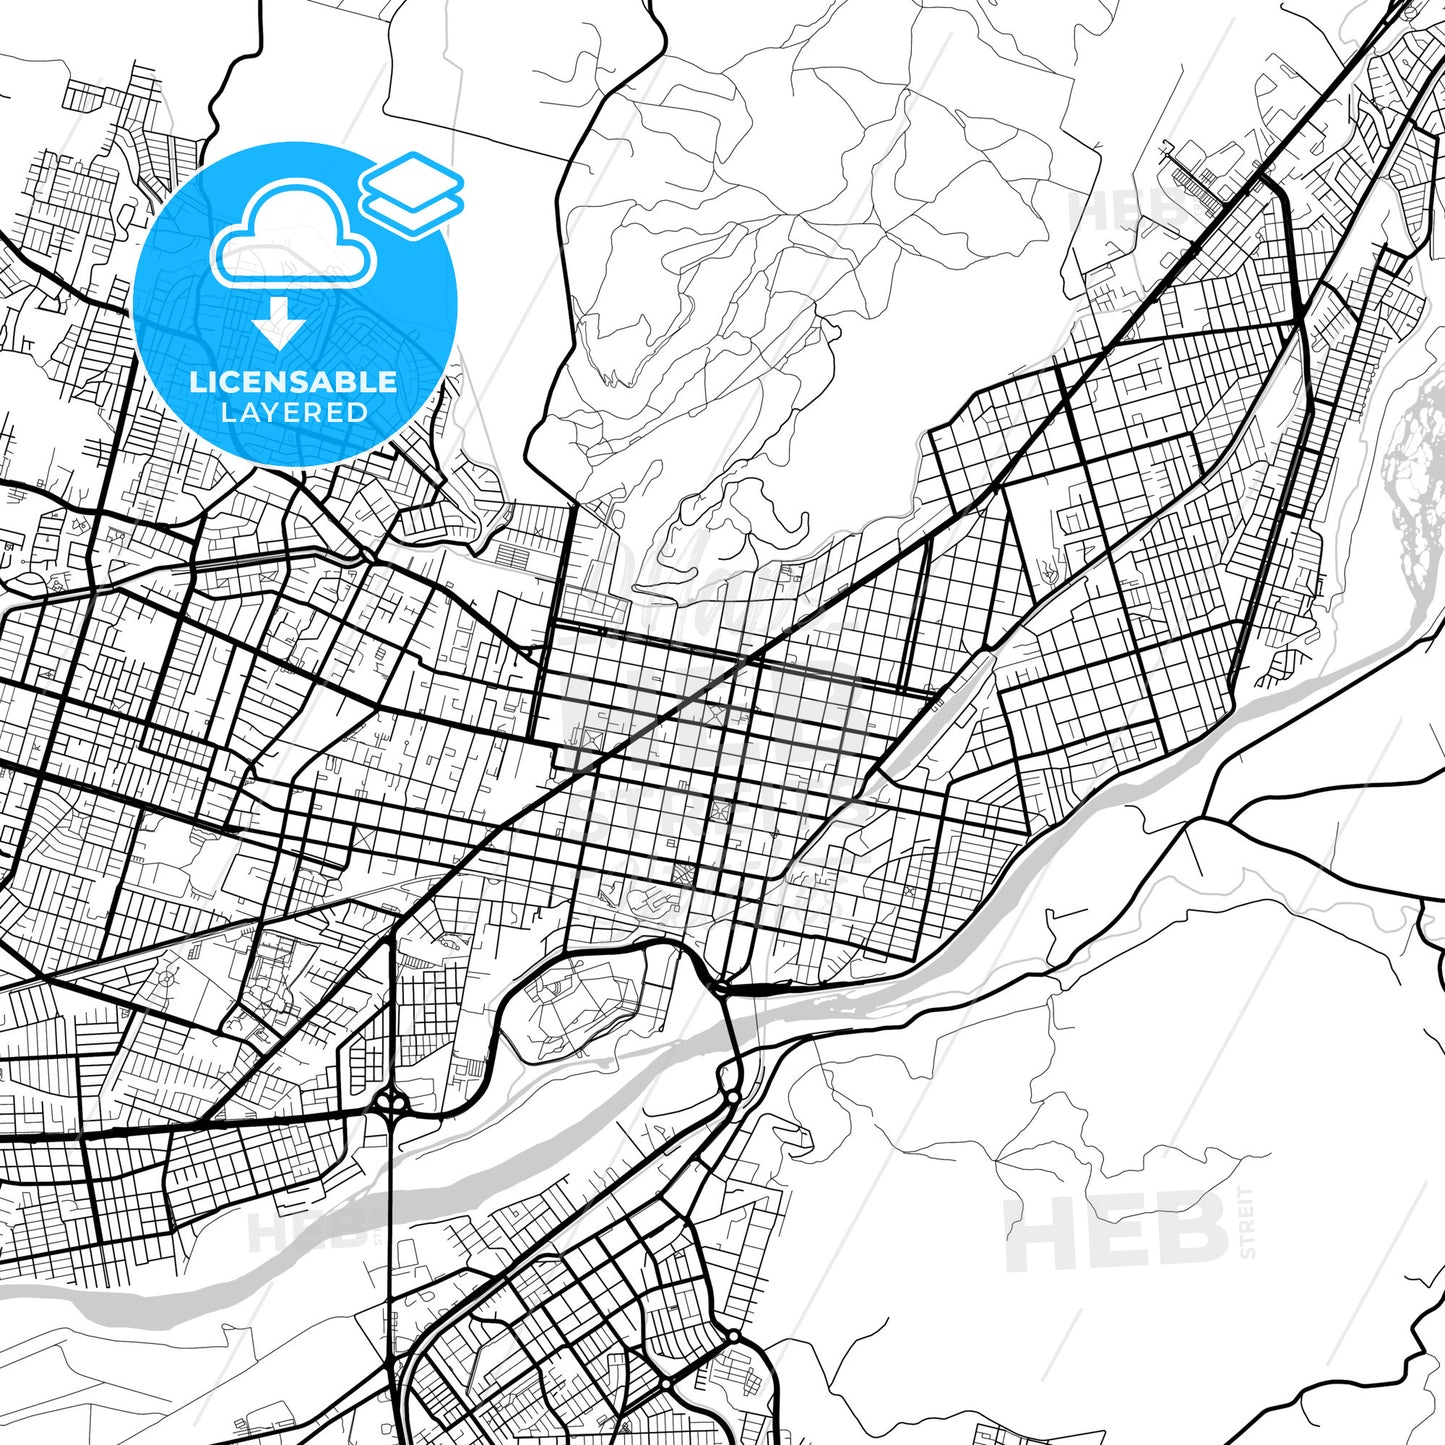 Layered PDF map of Temuco, Chile